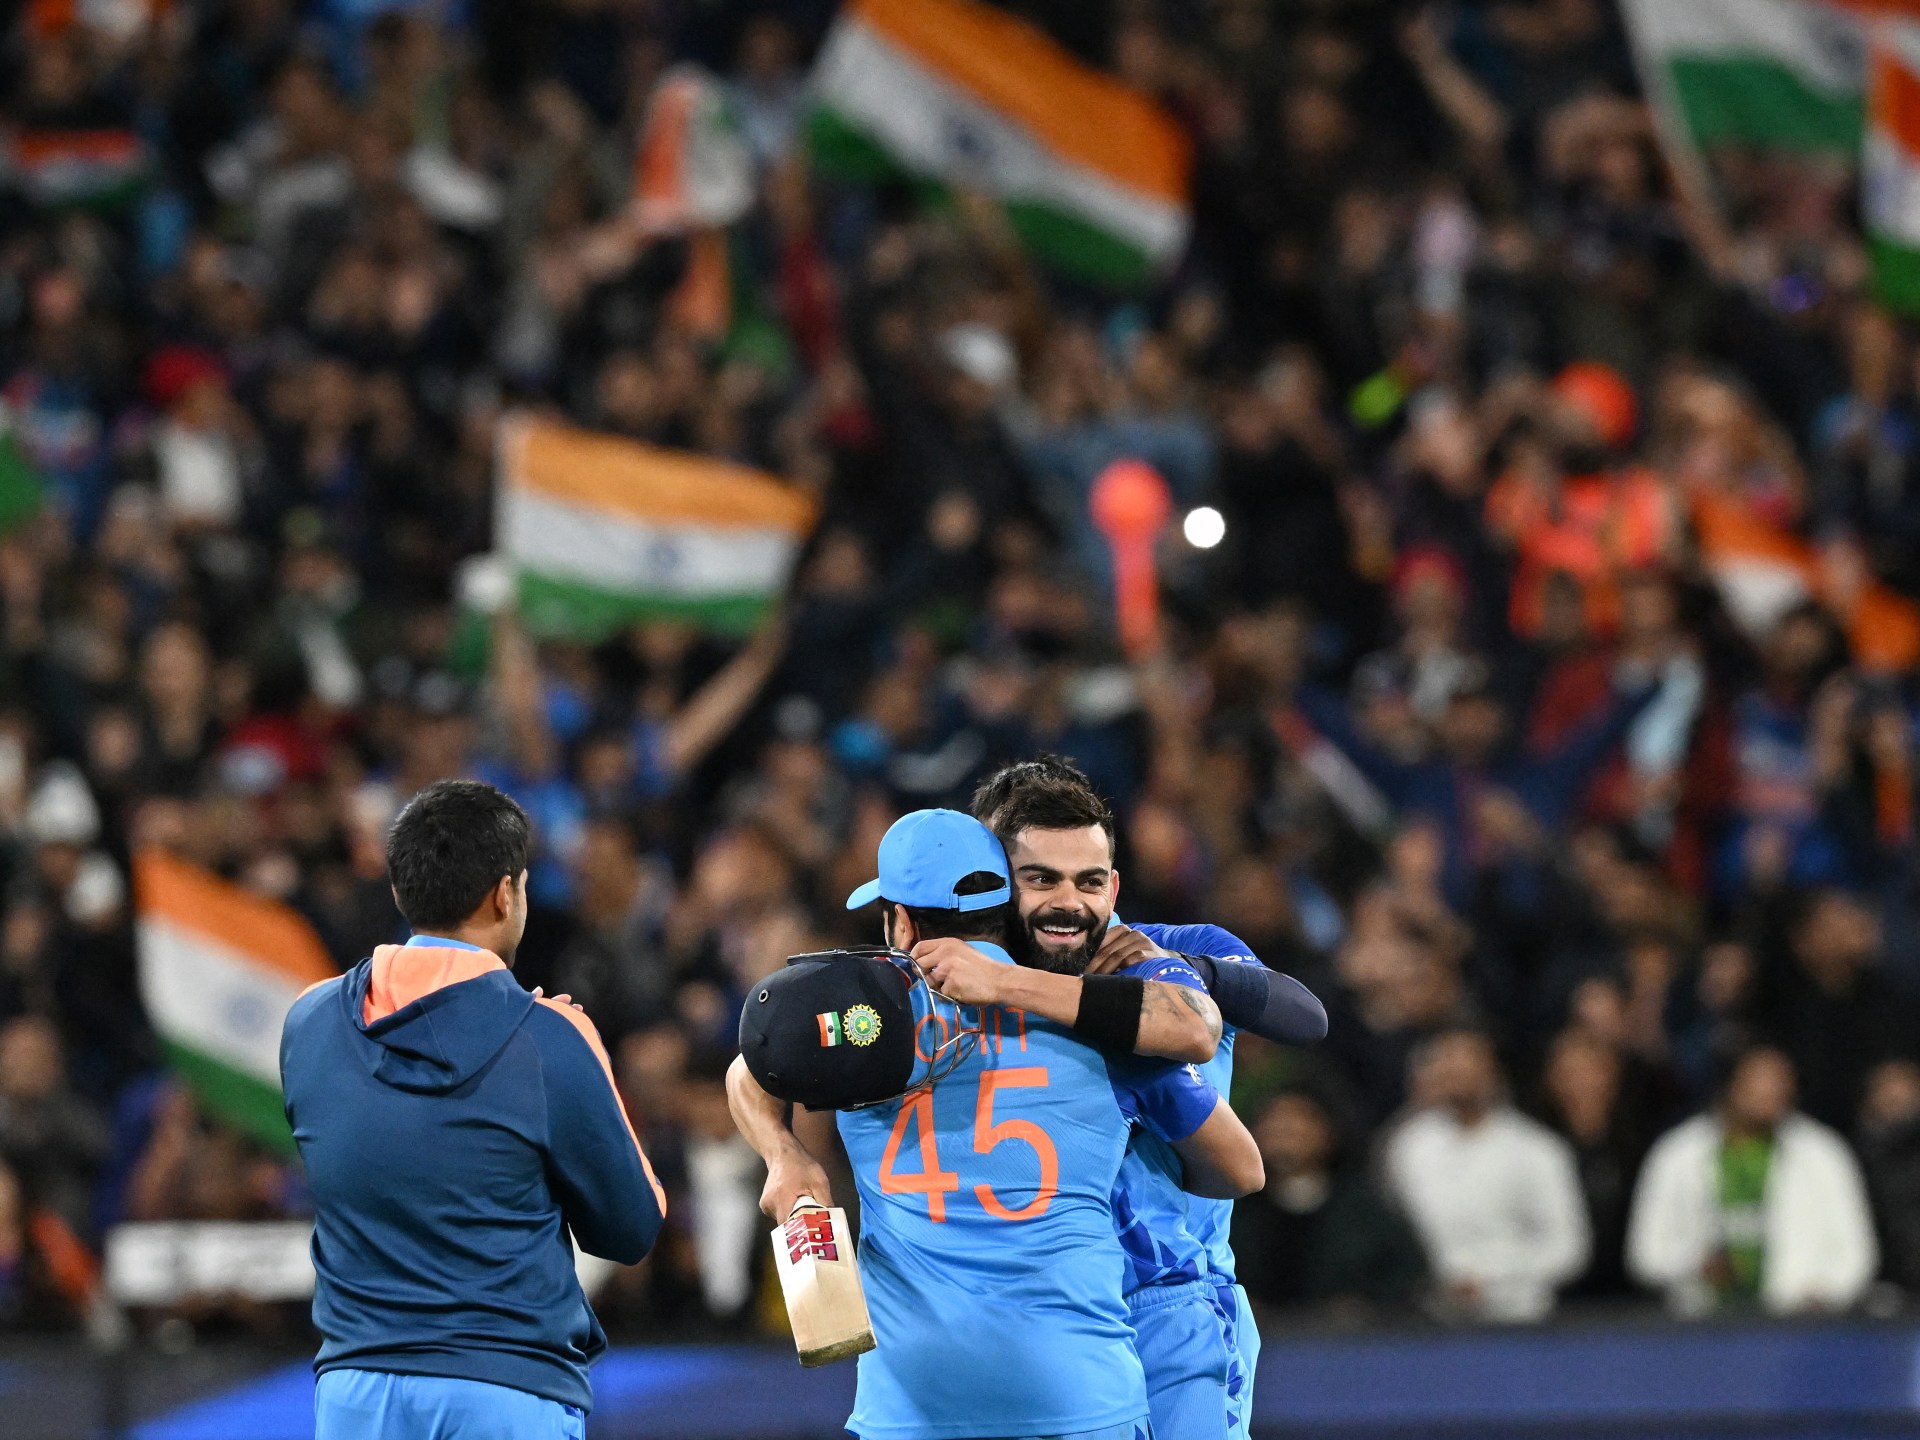 Who needs what in Group 2 to reach the T20 World Cup semis?